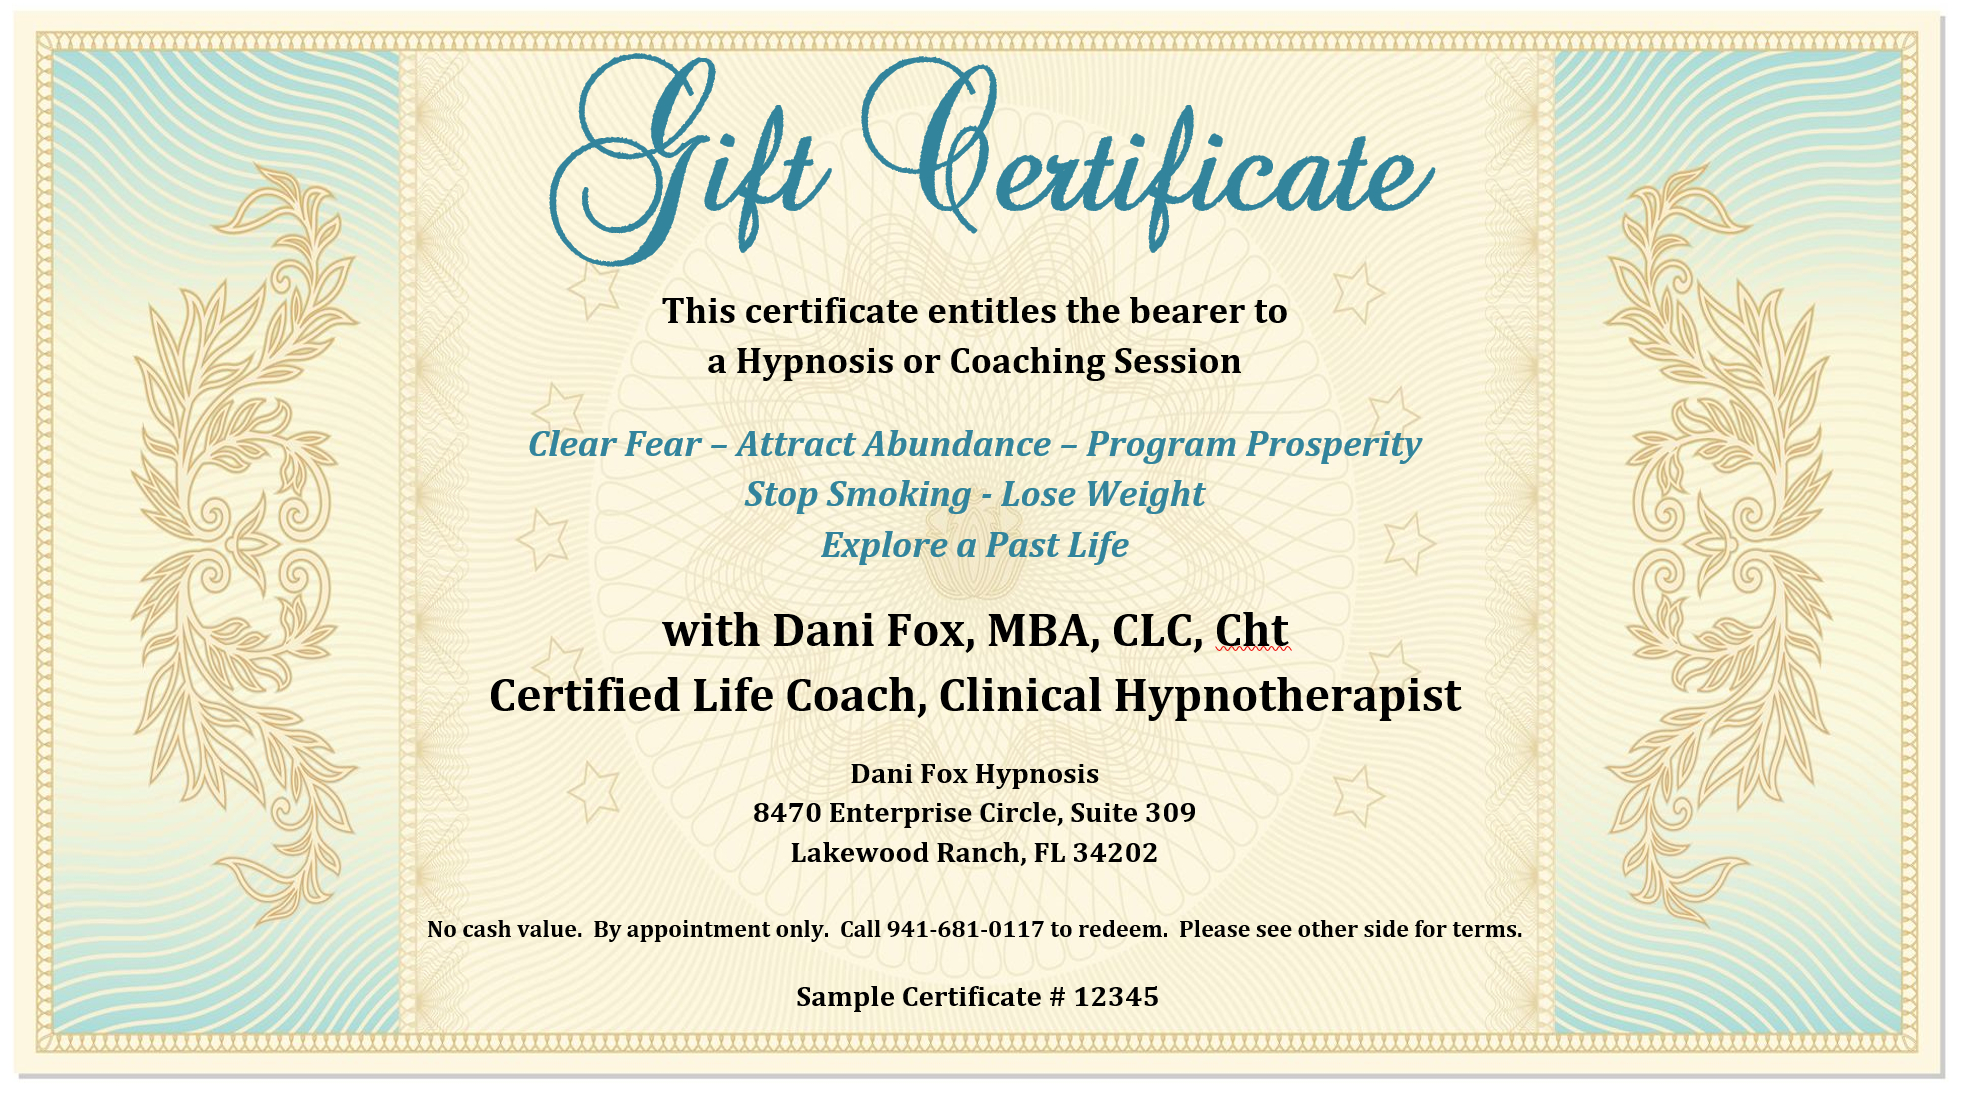 Gift Certificate – Dani Fox Hypnosis With Regard To Sample Inside This Entitles The Bearer To Template Certificate